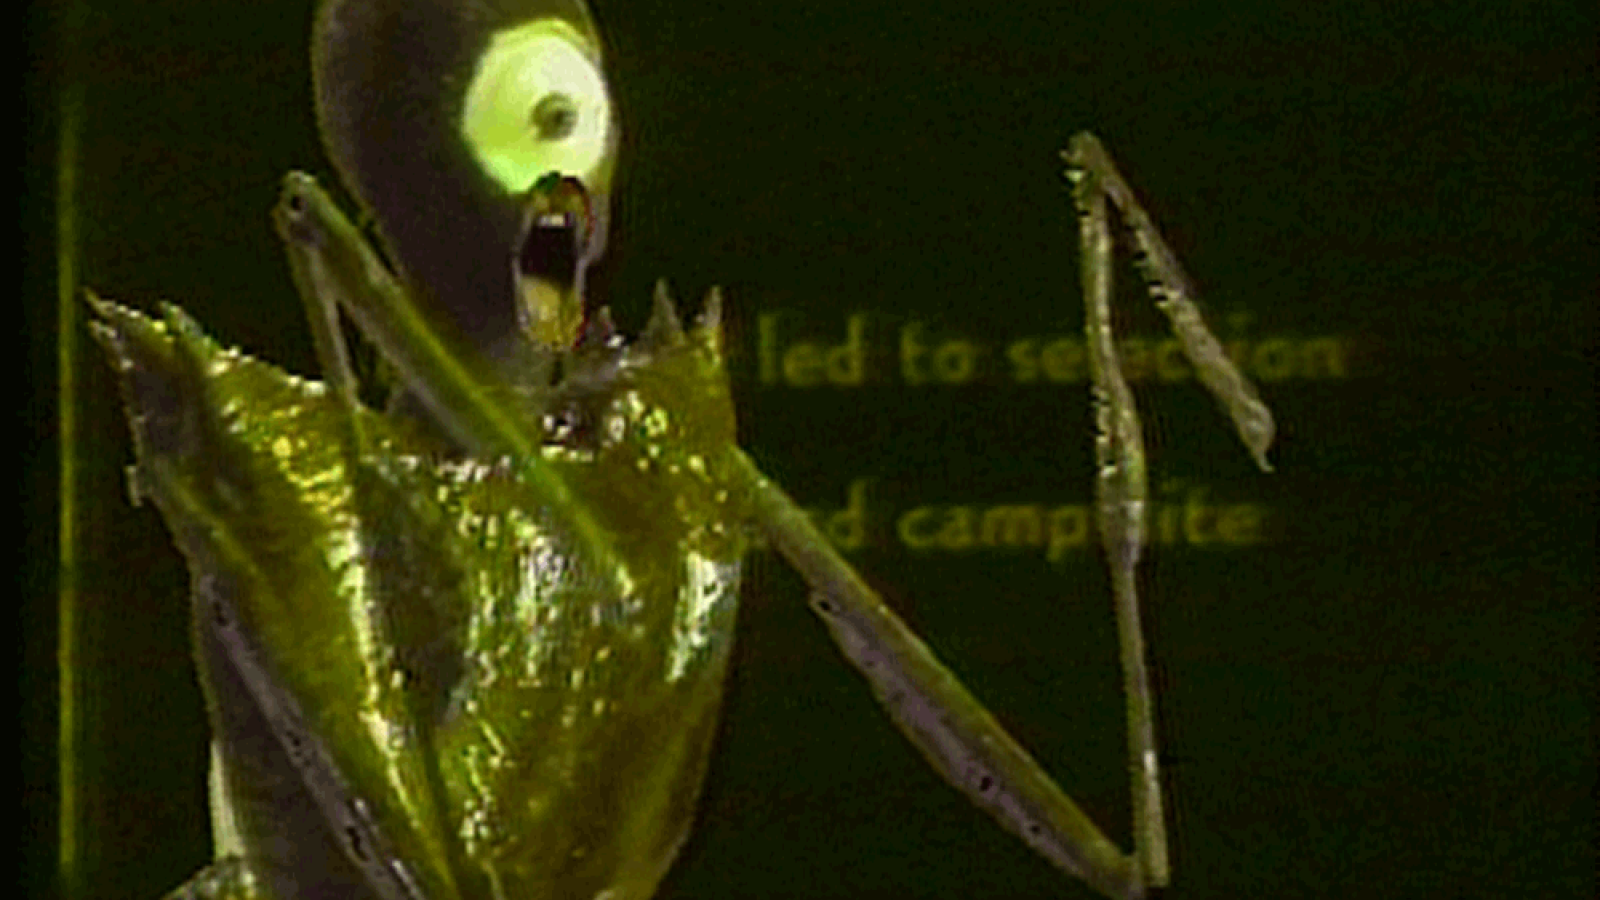 Still image from Branda Miller,  I Want Some Insecticide, 1986, 3:53 min, b&w and color, sound